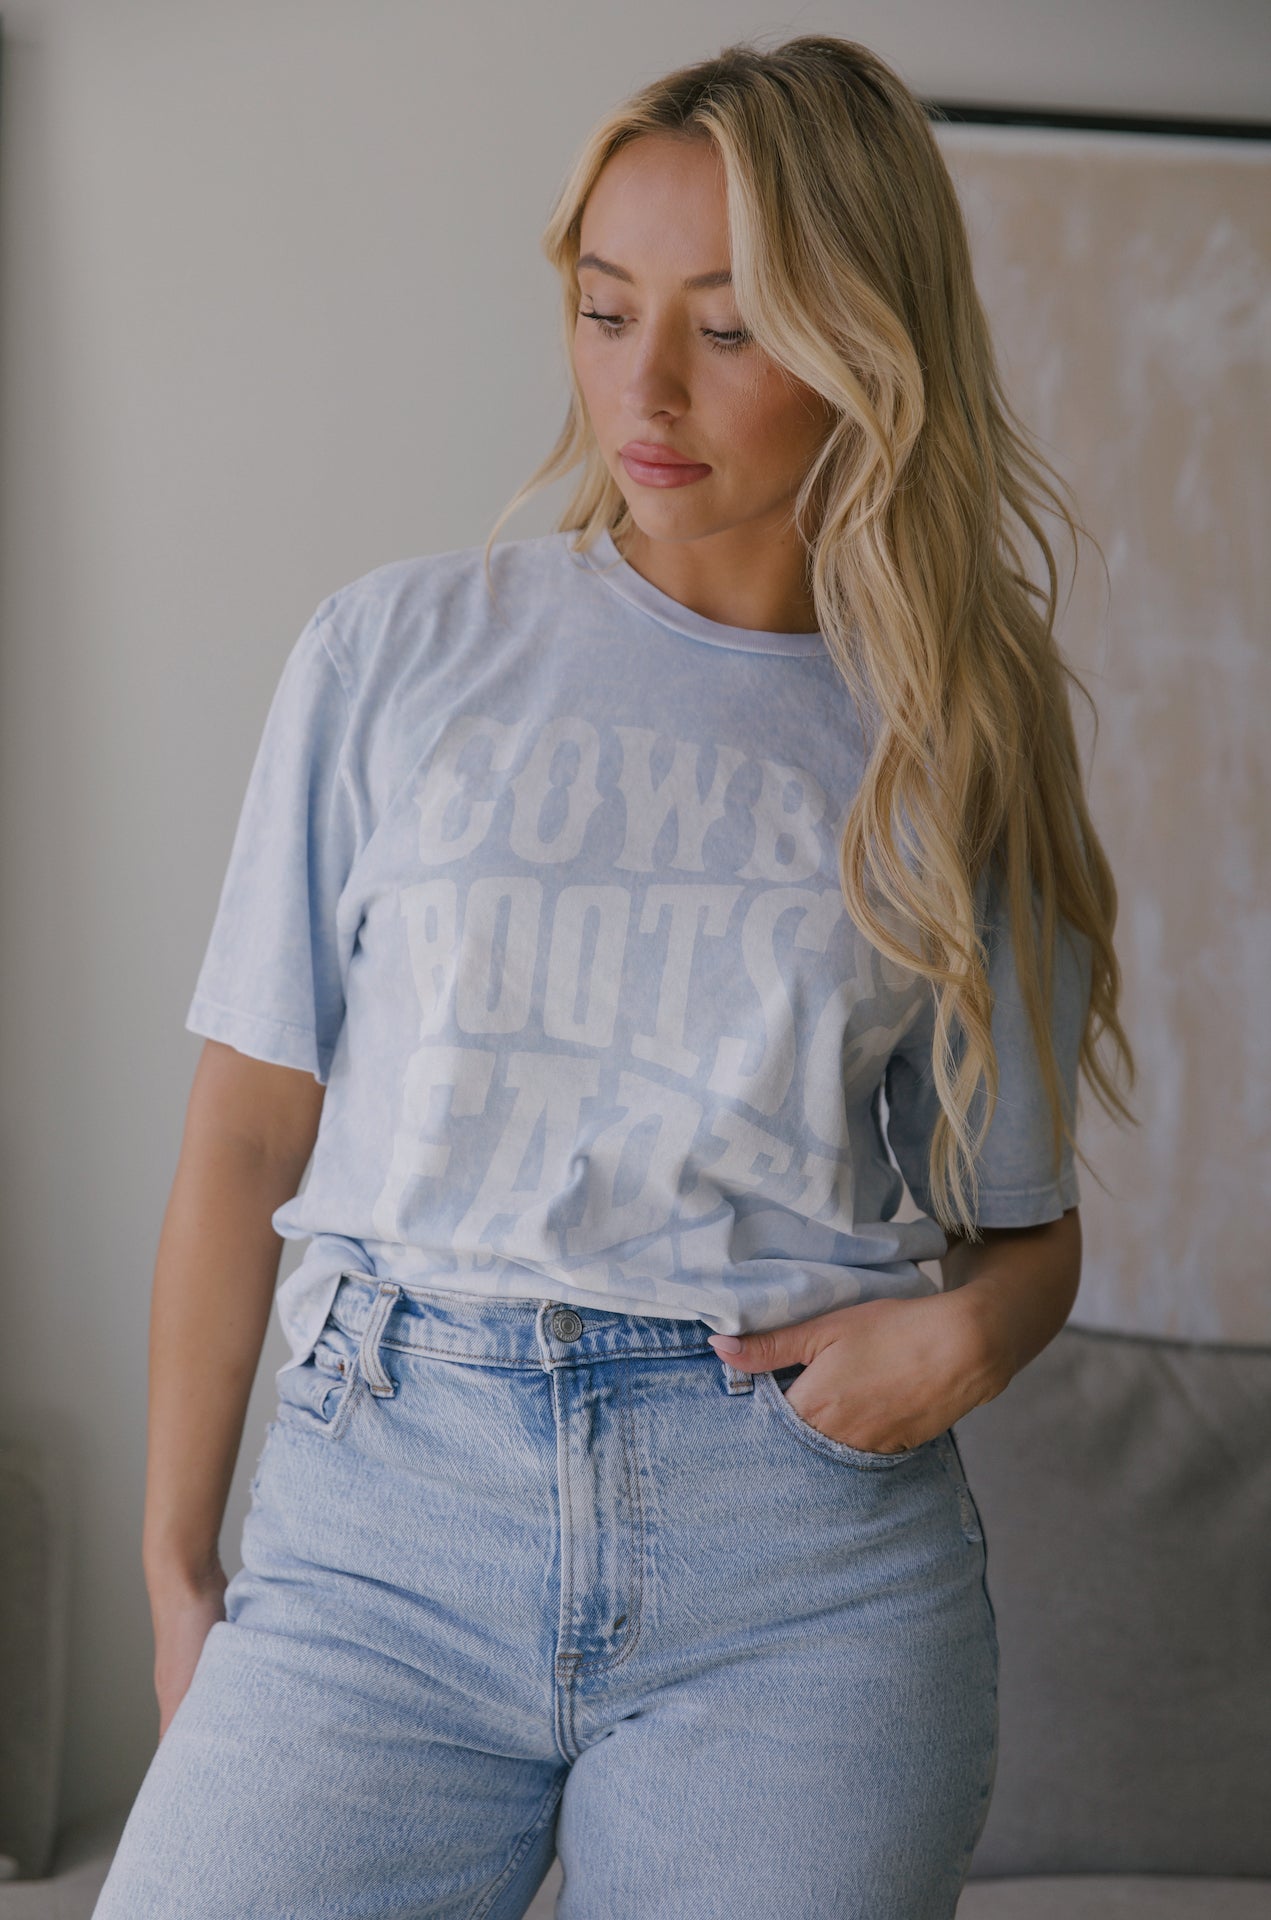 Cowboy Boots & Faded Jeans Graphic Tee